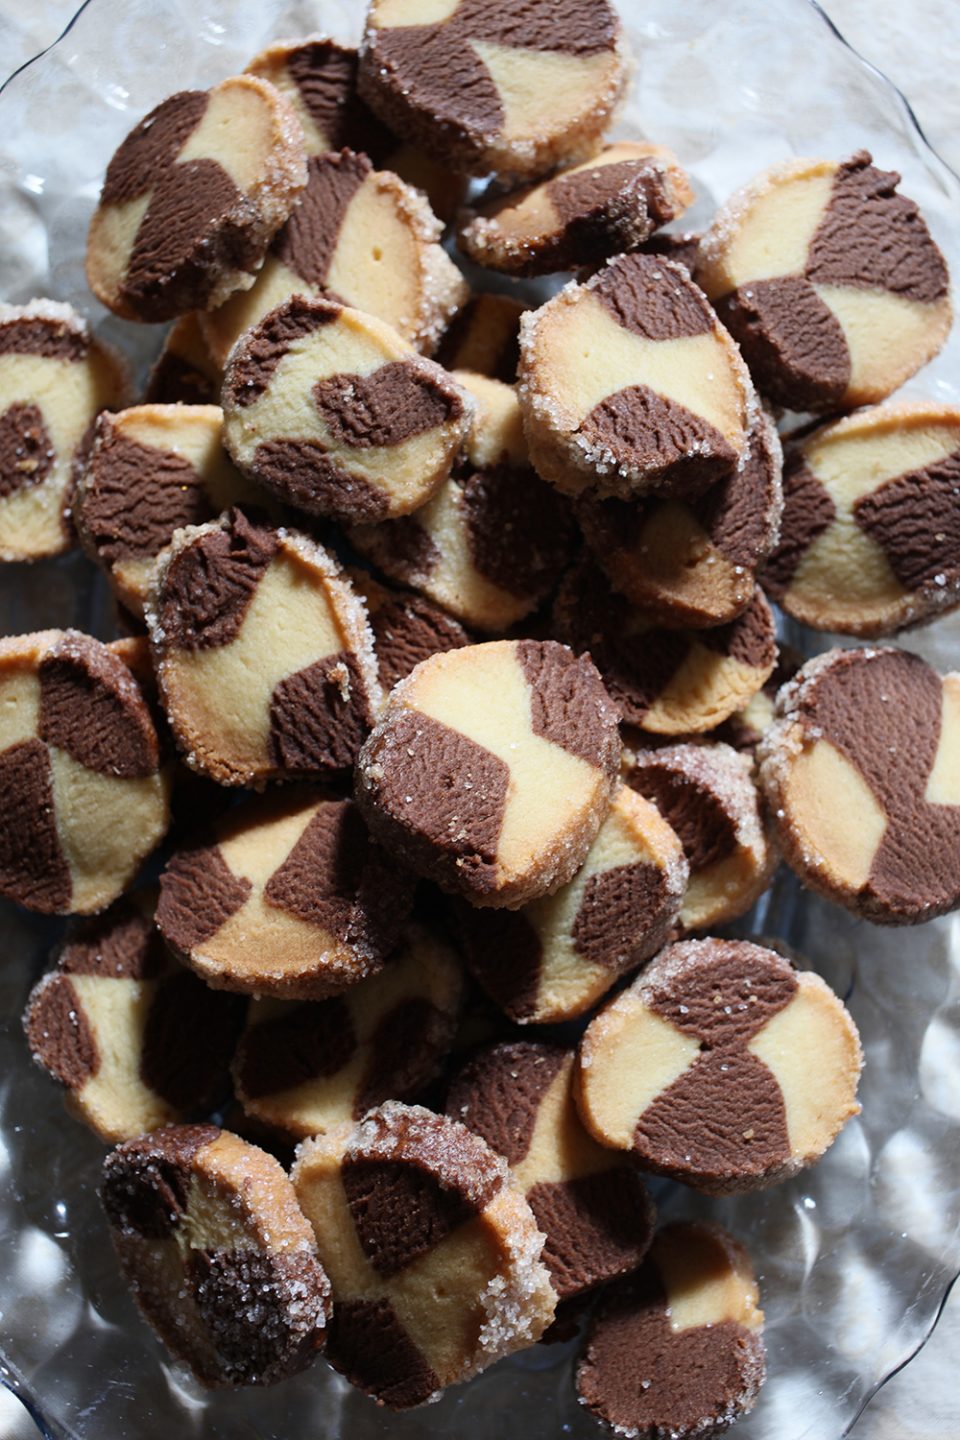 Chocolate and Vanilla Marble Cookies
